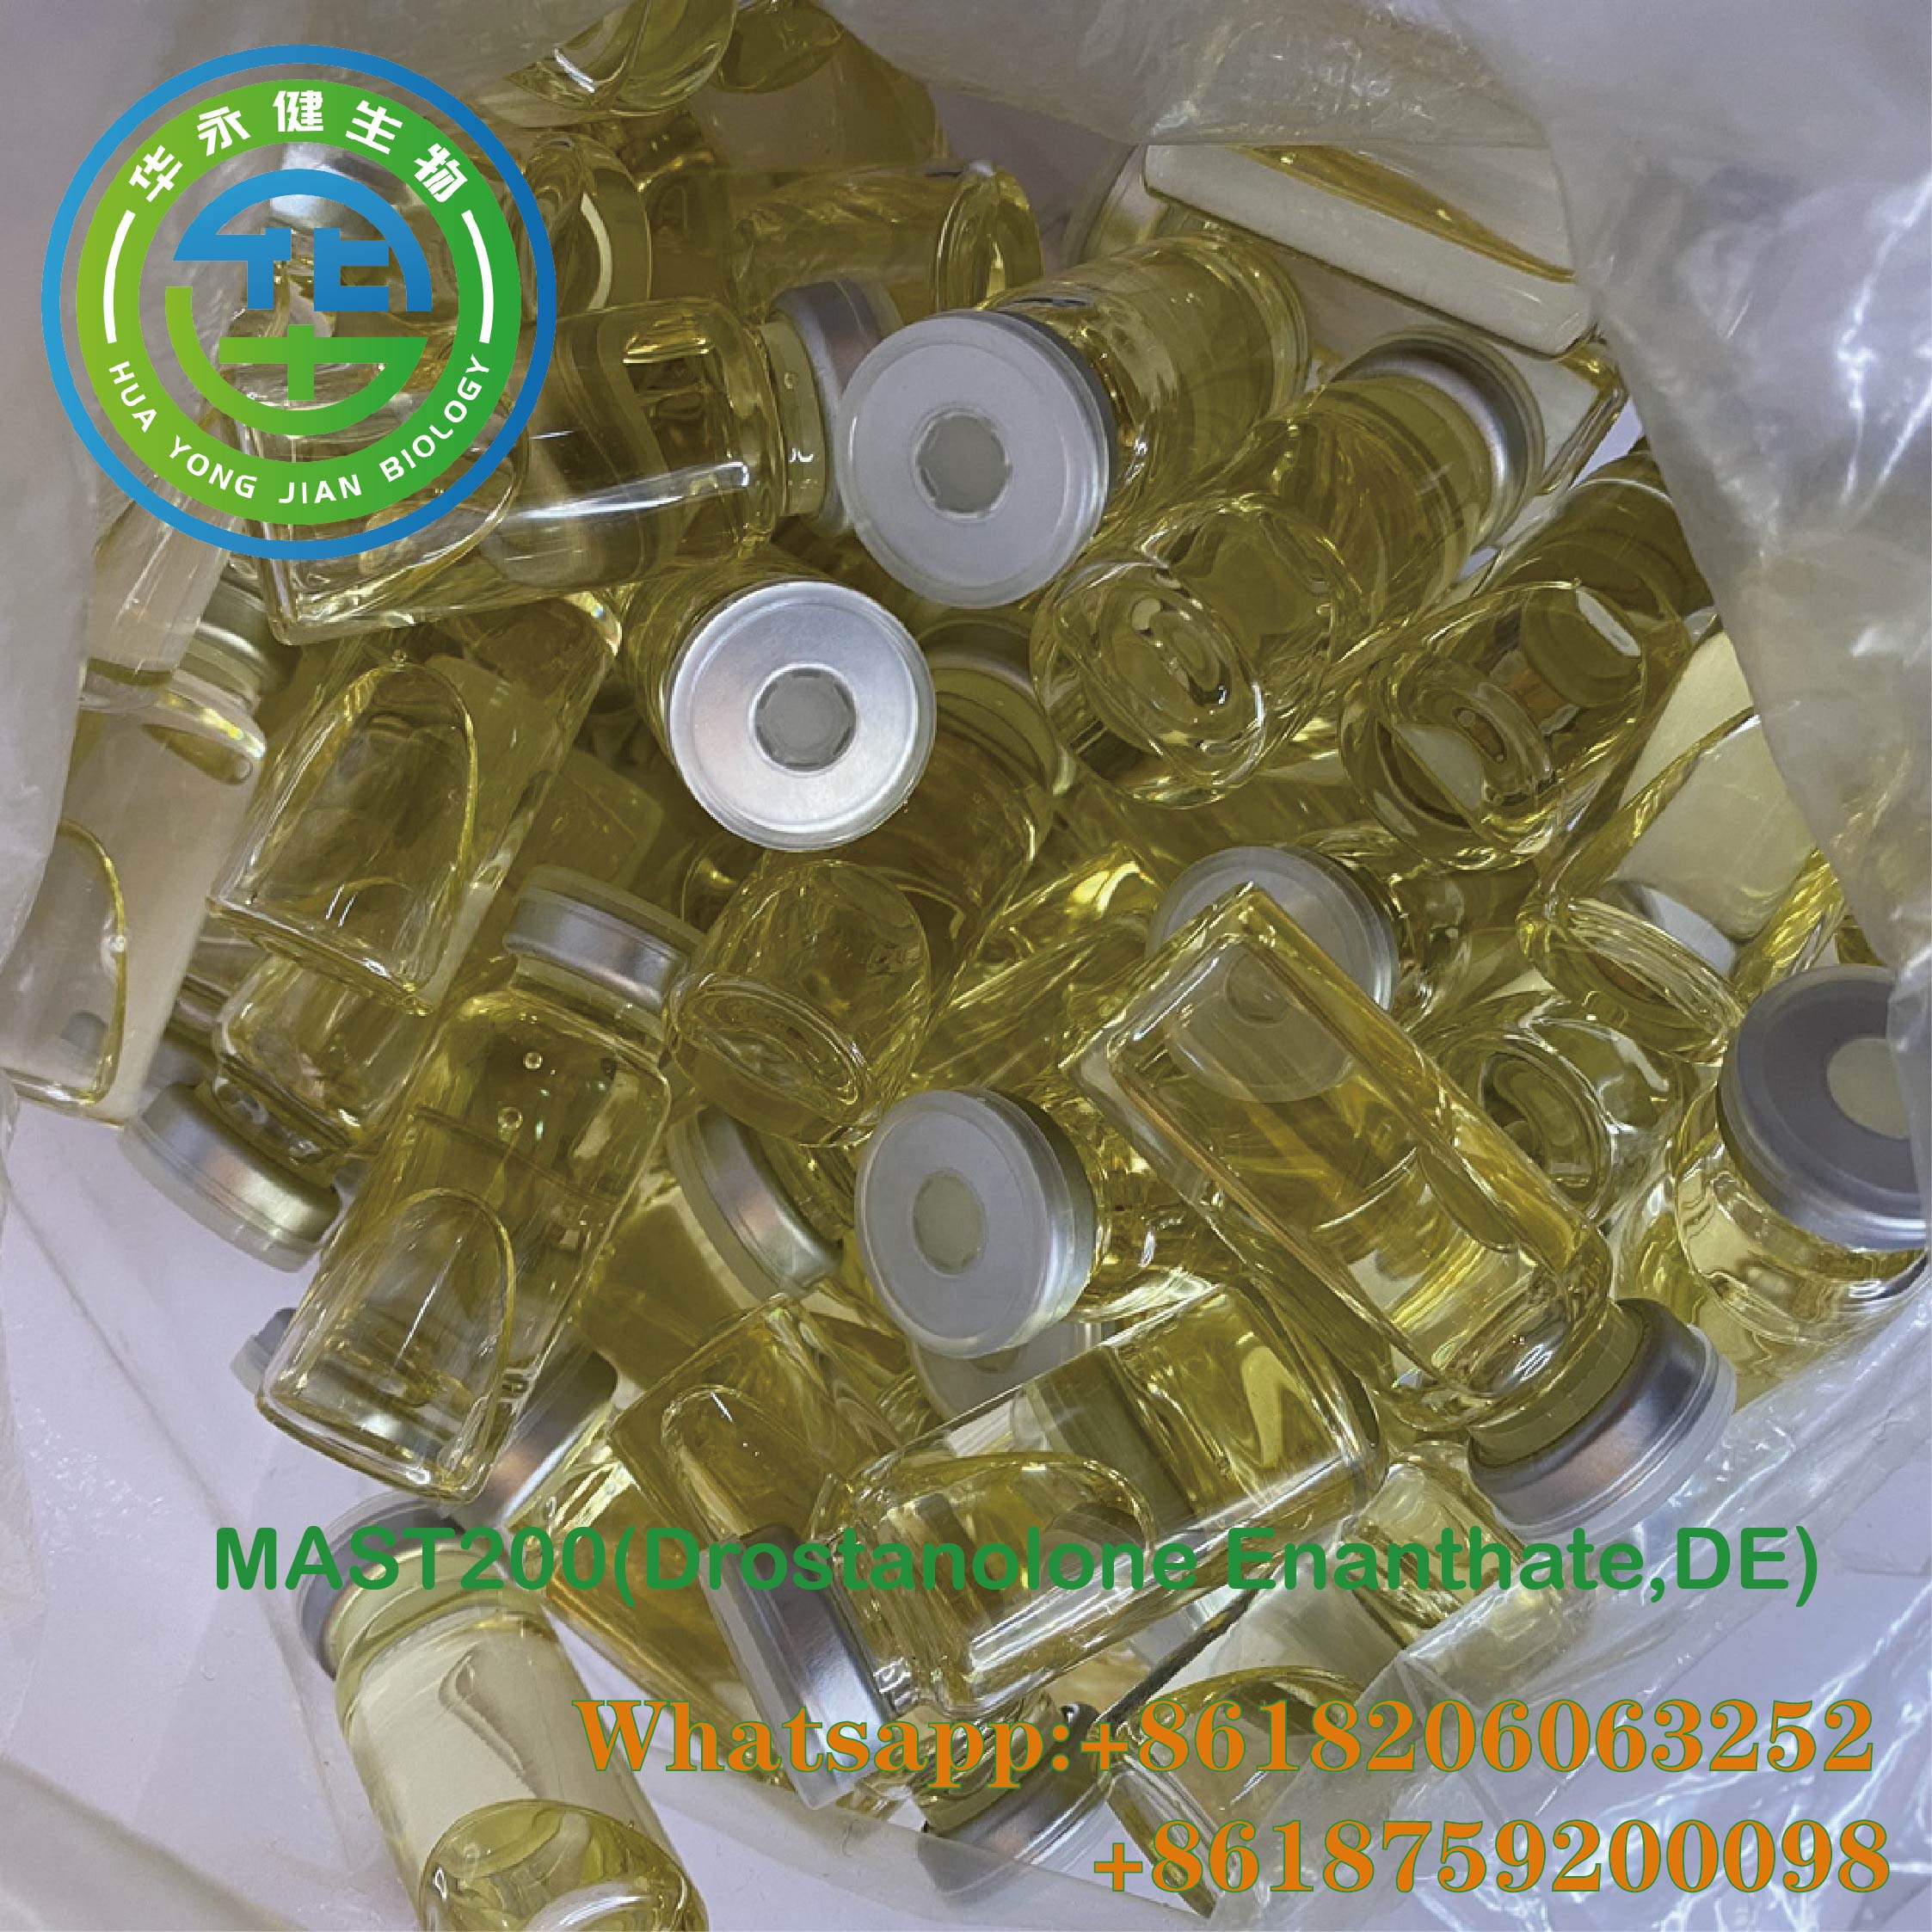 Mast 200 Injectable Anabolic Steroids Yellow Semi - Finished Drostanolone Enanthate 200mg/ml For Muscle Growth